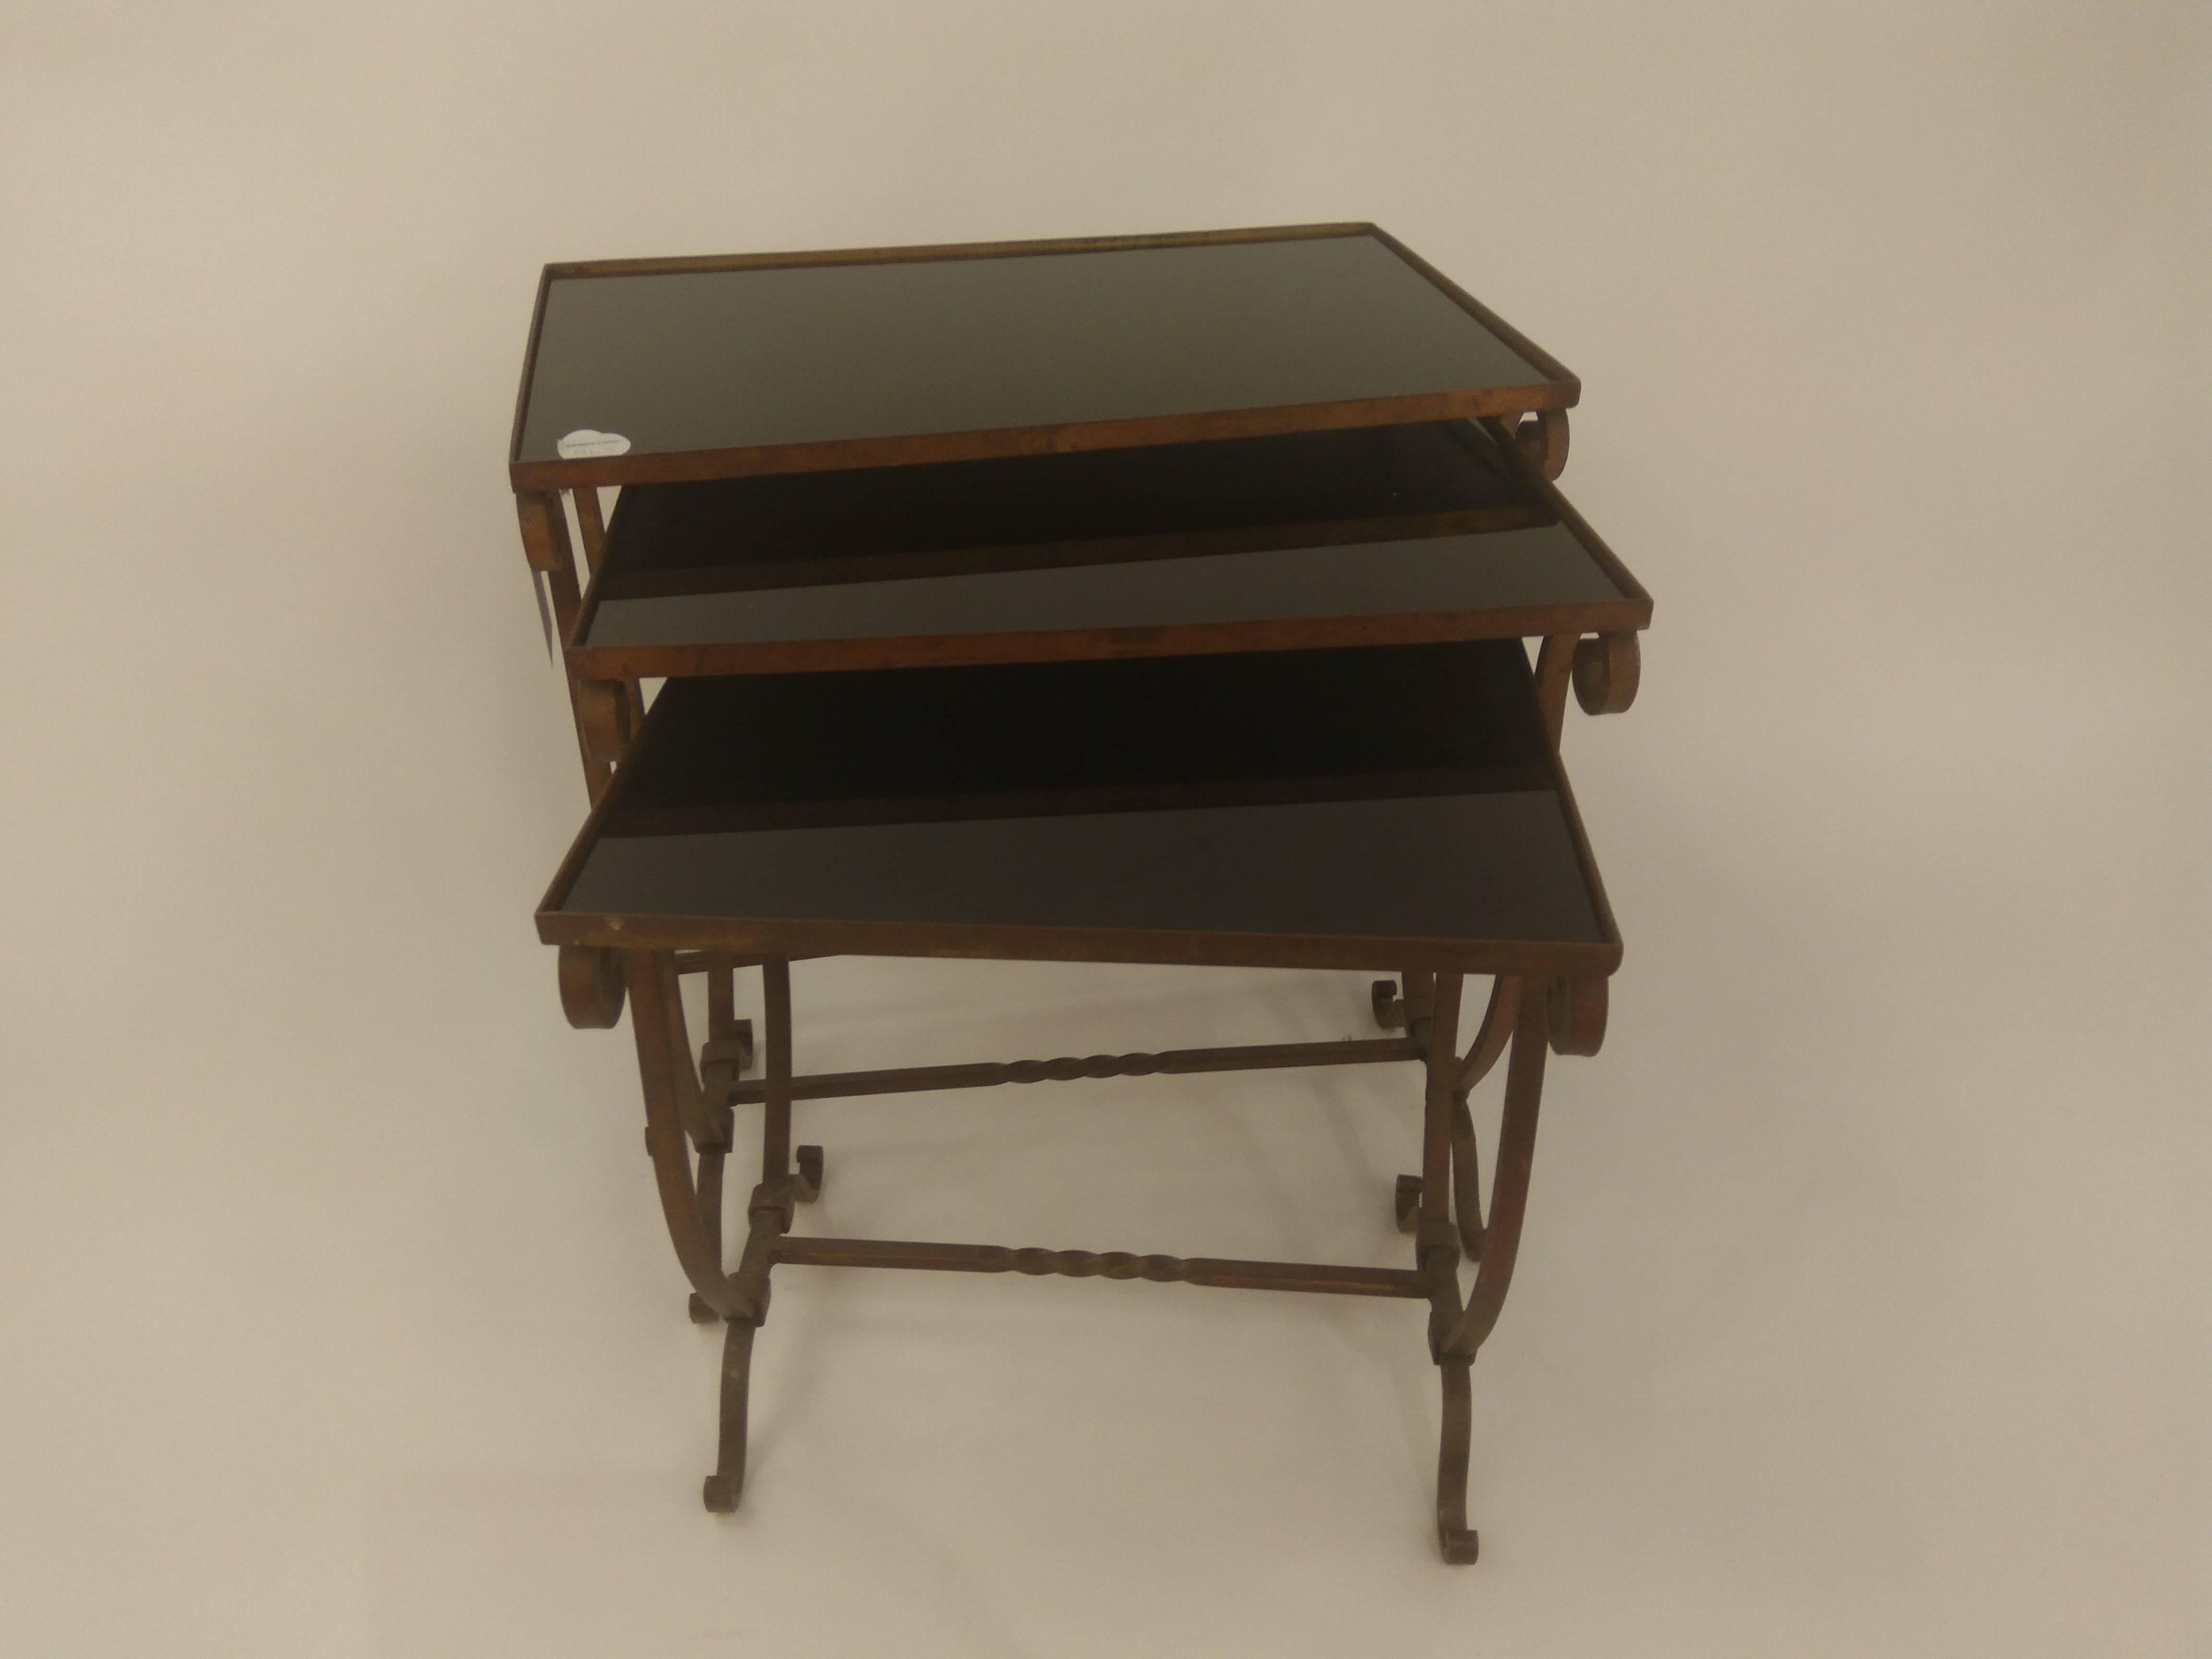 Hollywood Regency Italian Designed Nest of Three Tables Forged Iron with Black Glass, 1950